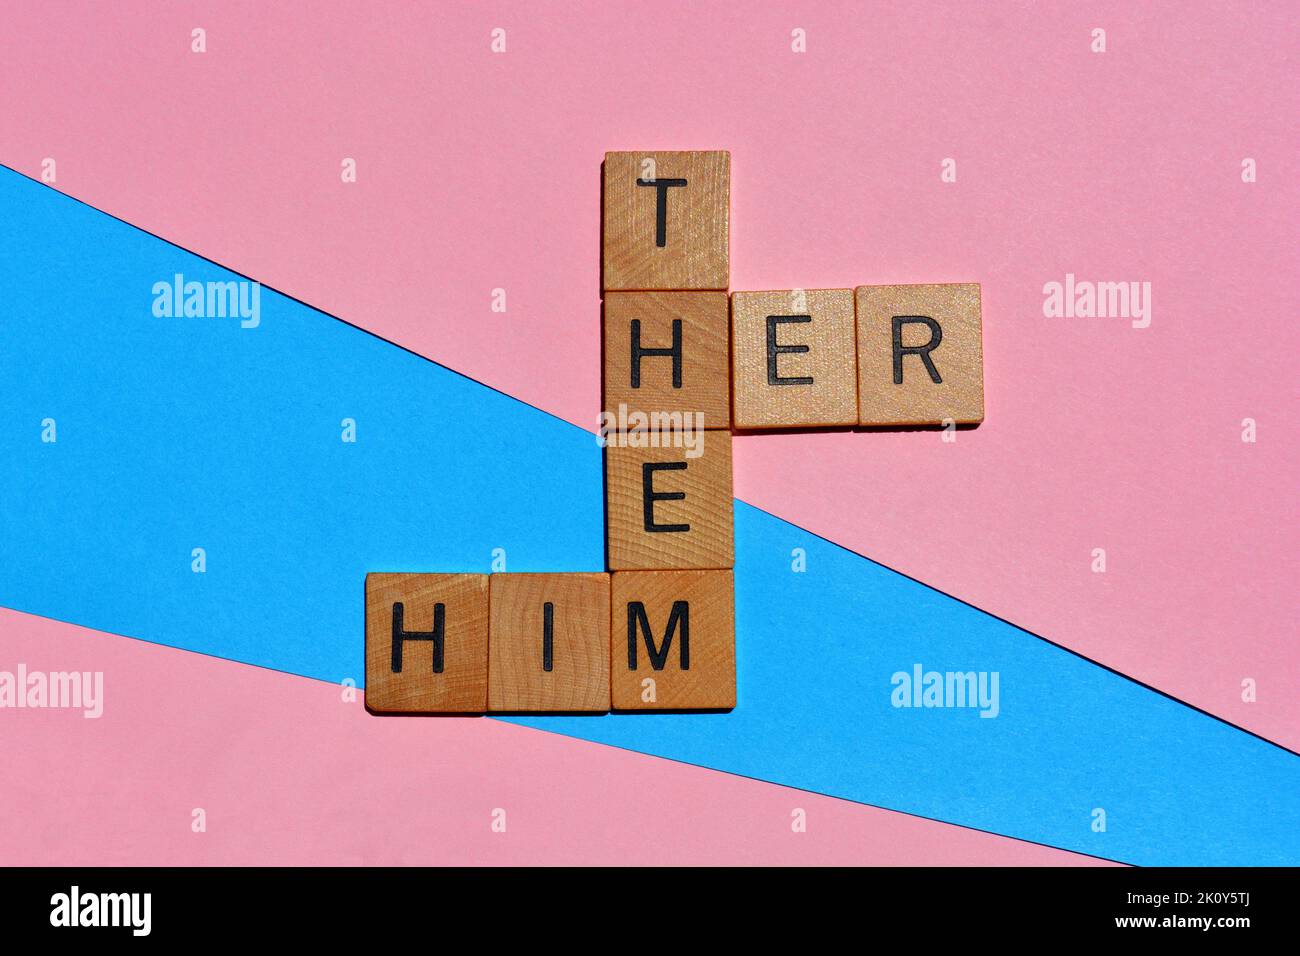 Him, Her, Them, words in wood alphabet letters in crossword form on pink and blue background. Gender pronouns Stock Photo